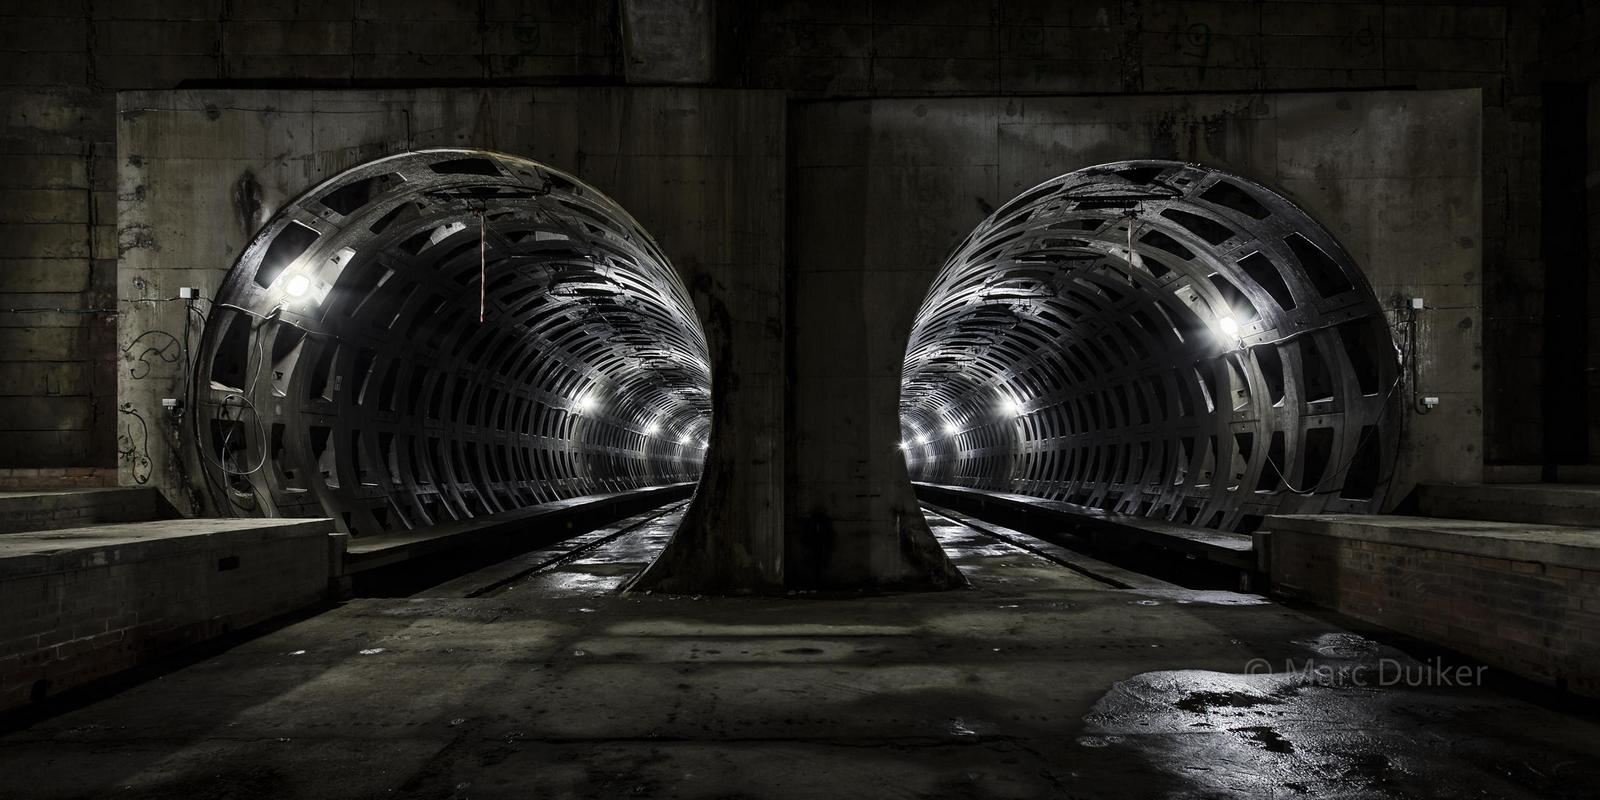 'Tunnel vision II' © by Marc Duiker